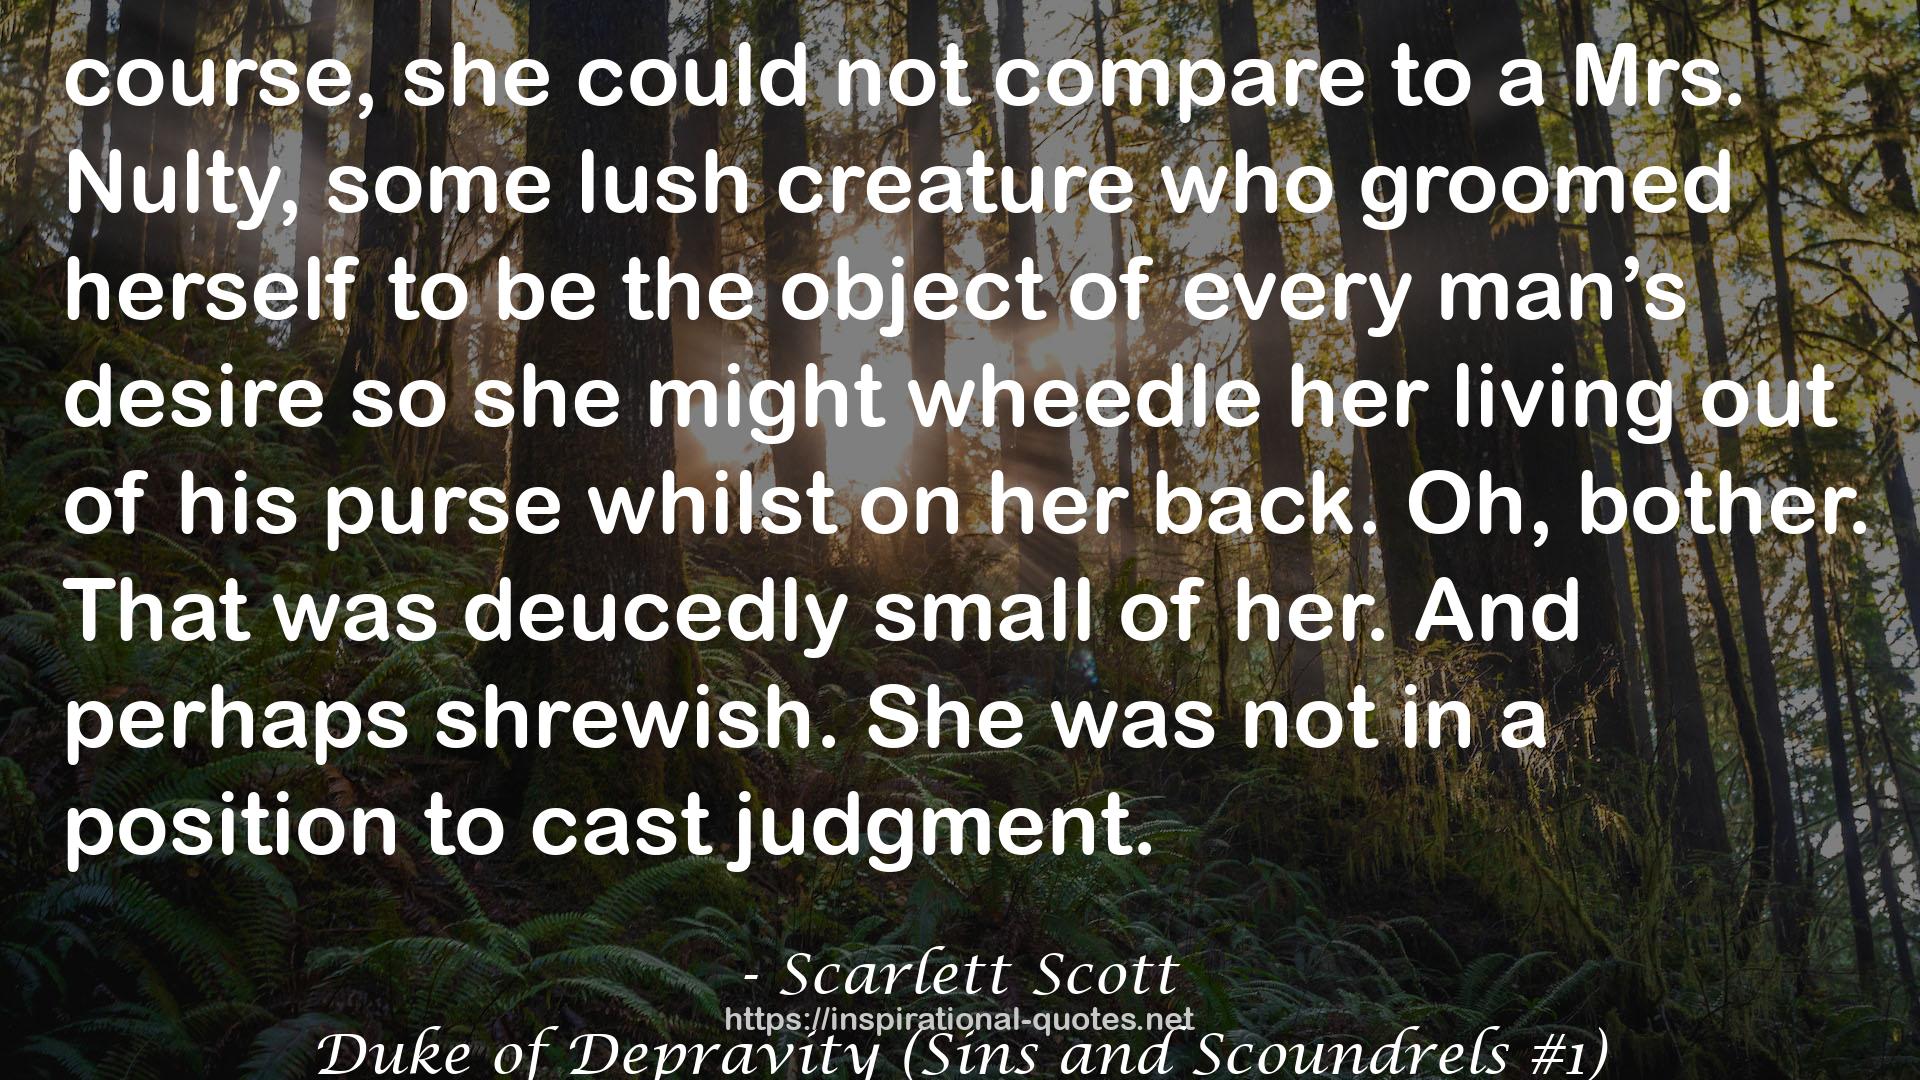 Duke of Depravity (Sins and Scoundrels #1) QUOTES